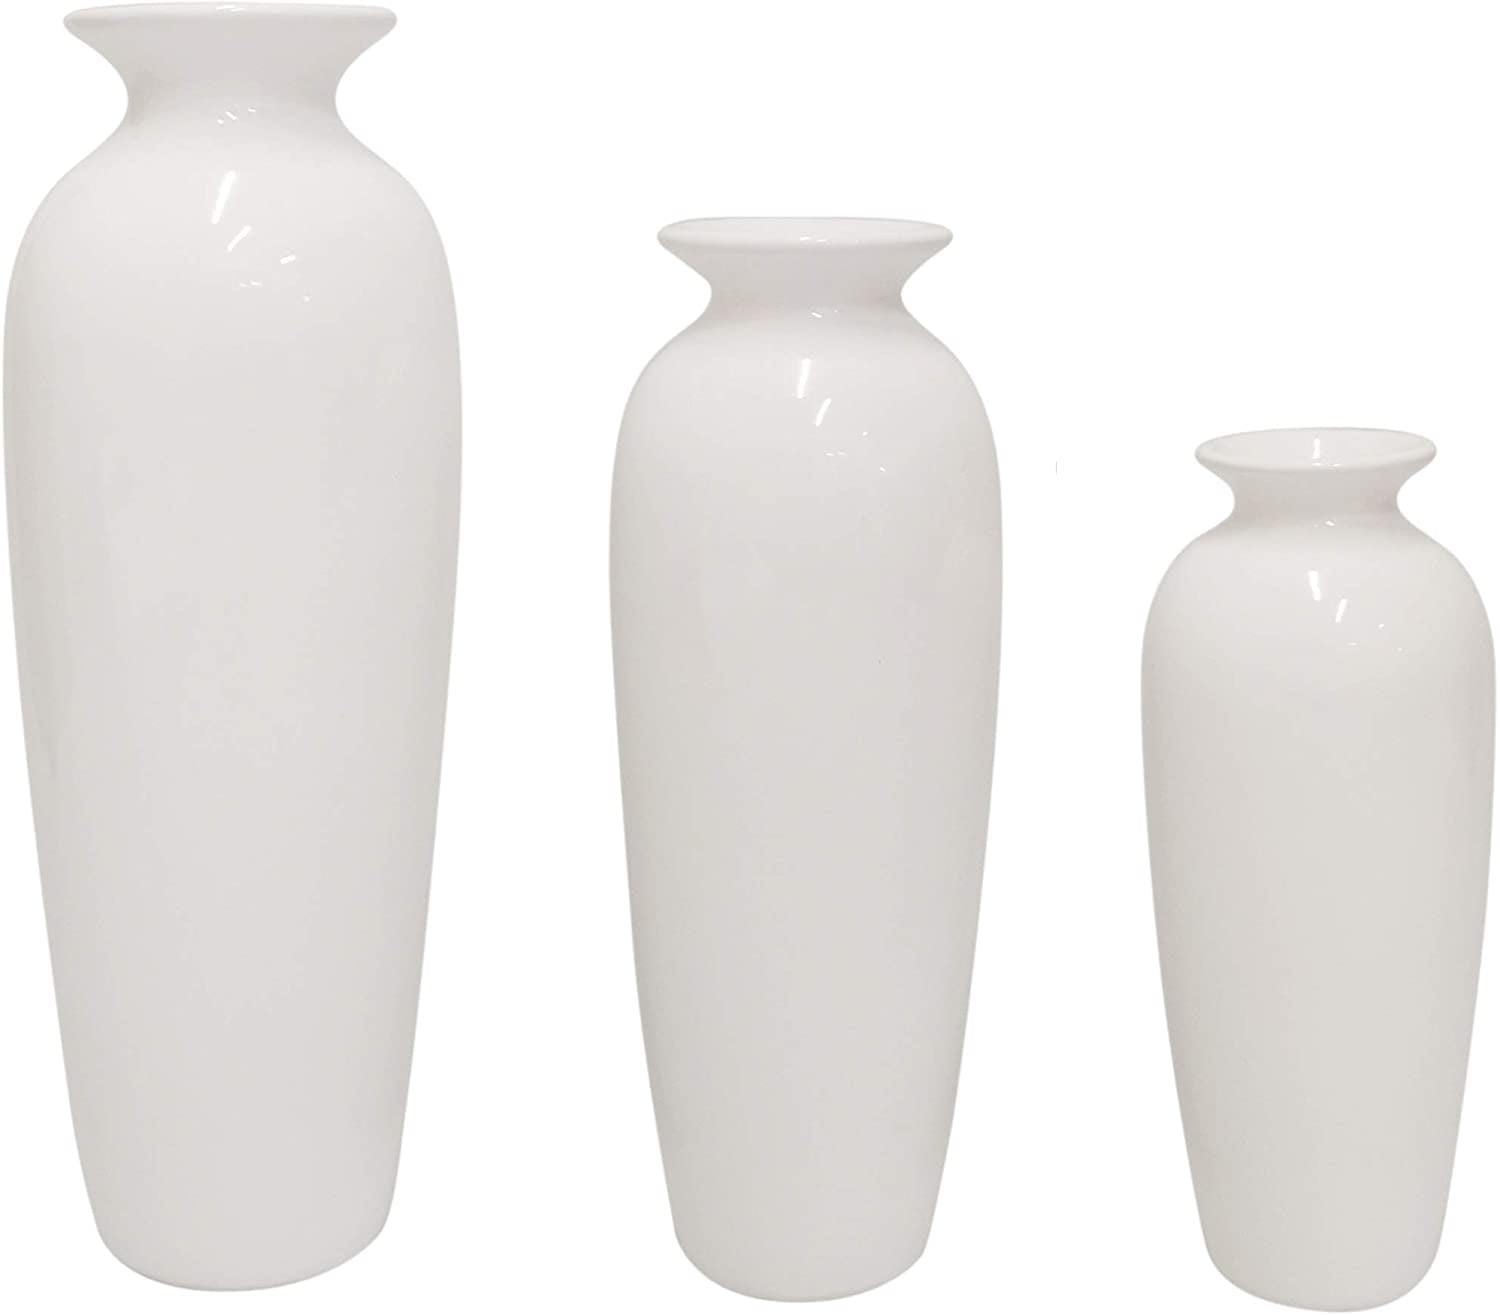 Hosley Set of 3 White Ceramic Honeycomb Vase Tall 12 Inch Medium 10 Inch Short 8 Inch High Each Ideal Gift for Wedding Special Occasion Dried Floral Arrangements Home Office Spa O4